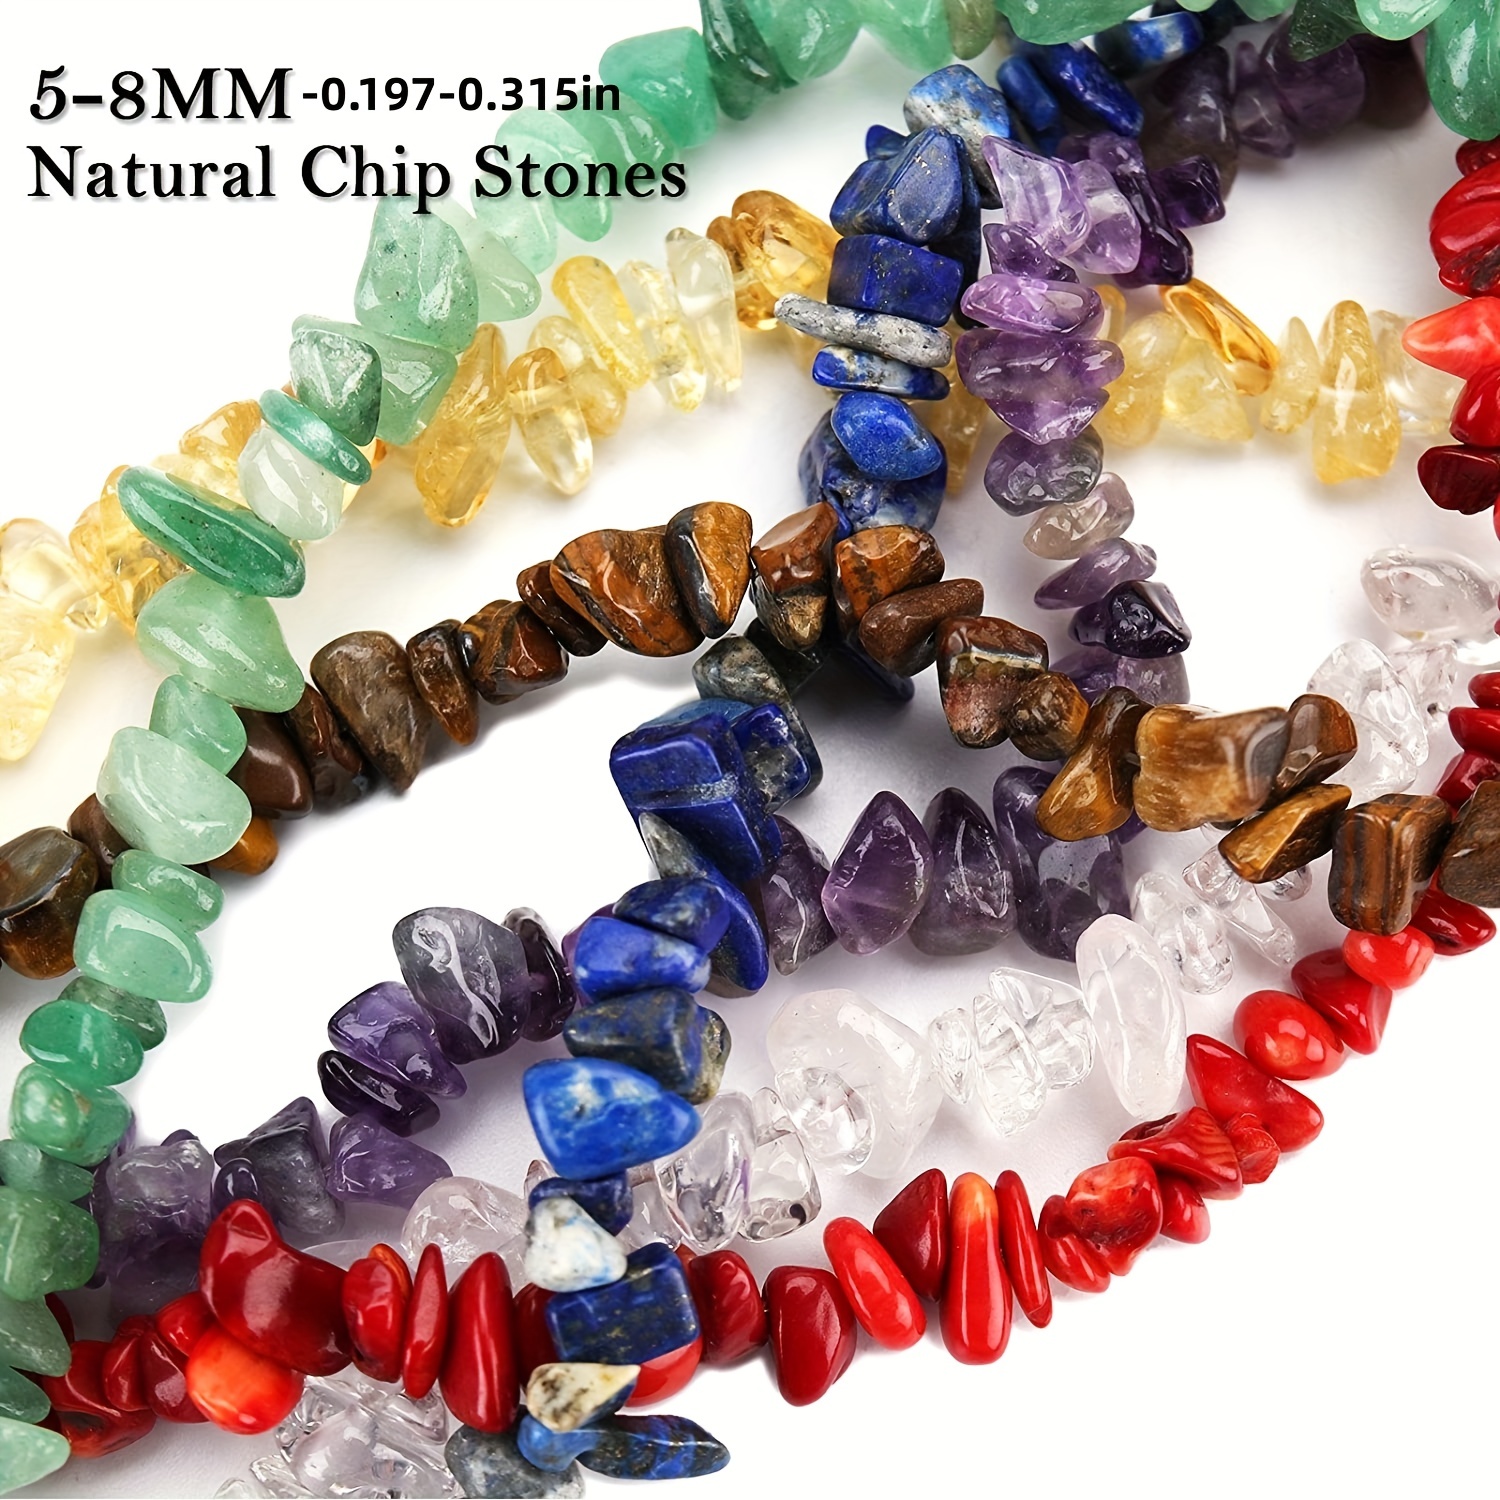 Natural Chip Stone Beads 5-8mm Irregular Gemstone Beads Kit Multicolor  Healing Crystal Loose Rocks Bead Hole Drilled for Jewelry Necklace Bracelet